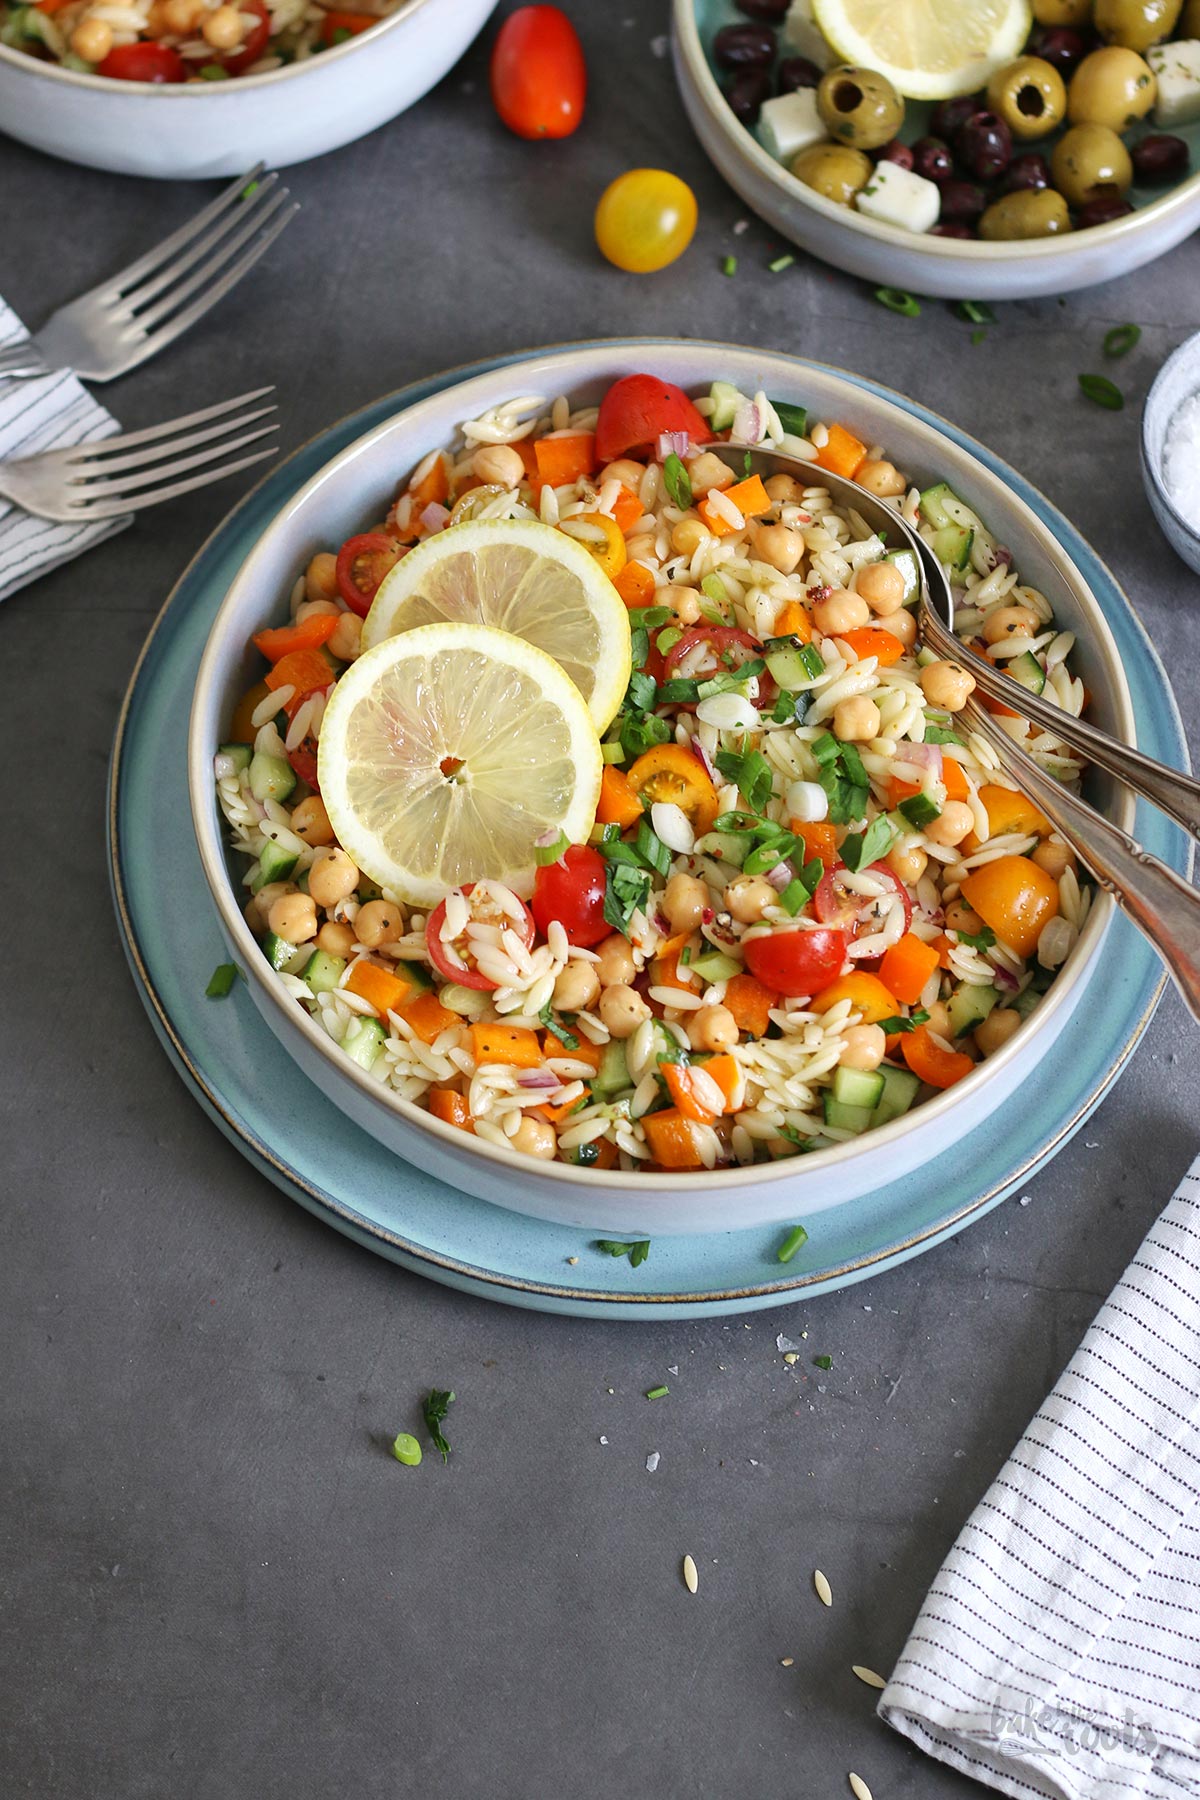 Orzo & Chickpea Summer Salad | Bake to the roots